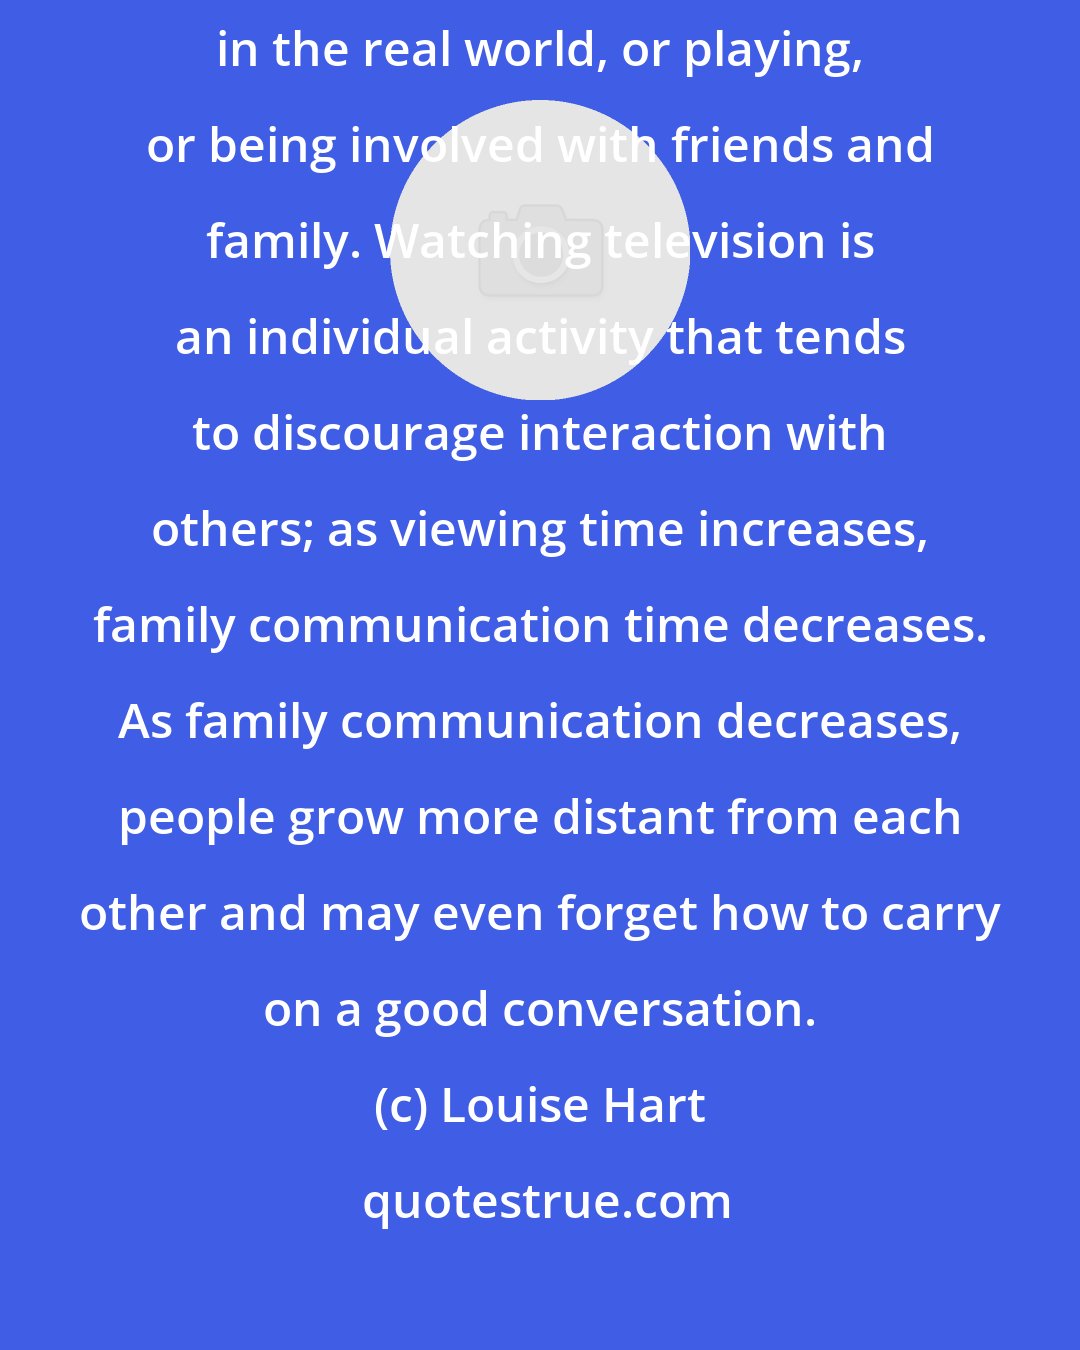 Louise Hart: The hours spent viewing TV are hours not available for actively participating in the real world, or playing, or being involved with friends and family. Watching television is an individual activity that tends to discourage interaction with others; as viewing time increases, family communication time decreases. As family communication decreases, people grow more distant from each other and may even forget how to carry on a good conversation.